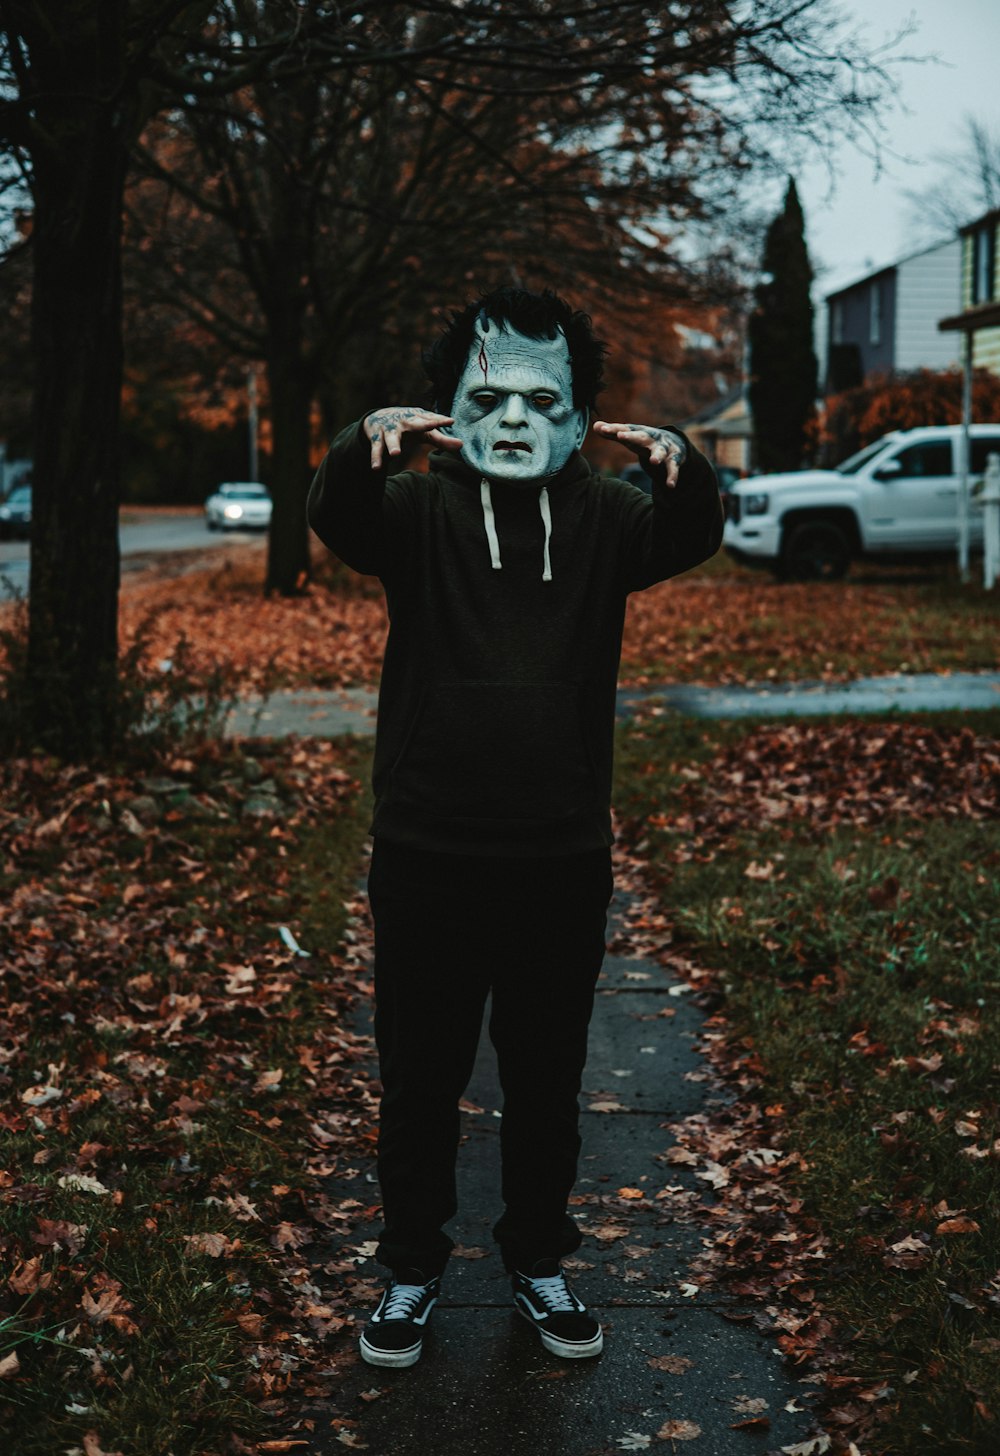 a person wearing a mask